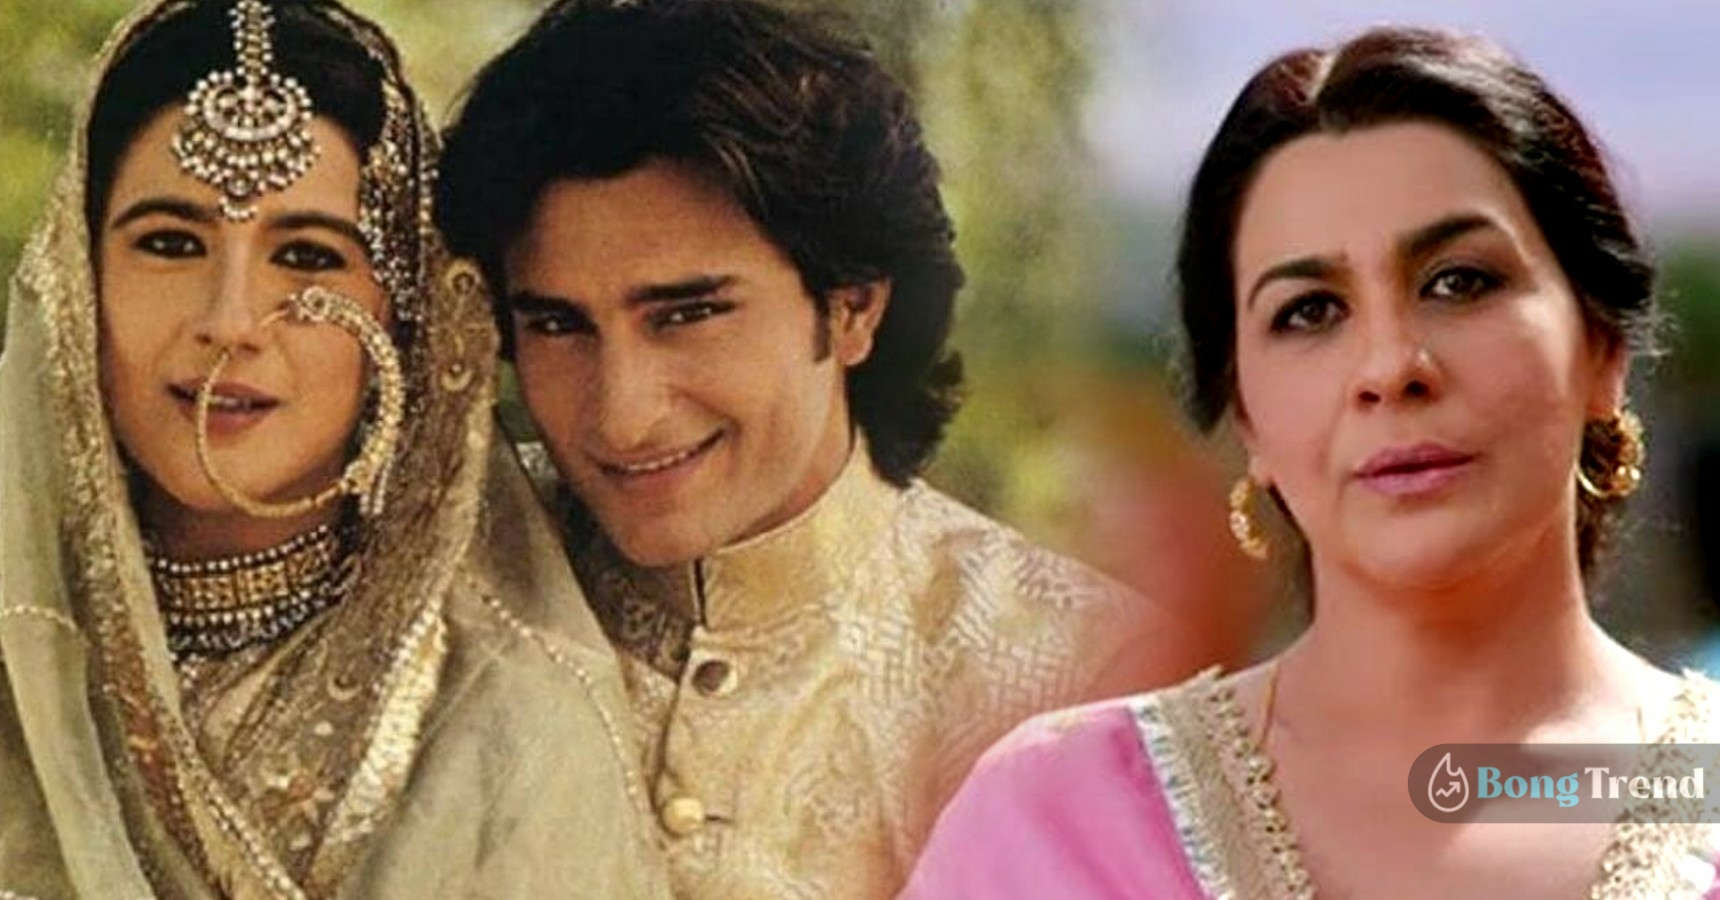 When Amrita Singh revealed why she didn’t want to have kids with Saif Ali Khan